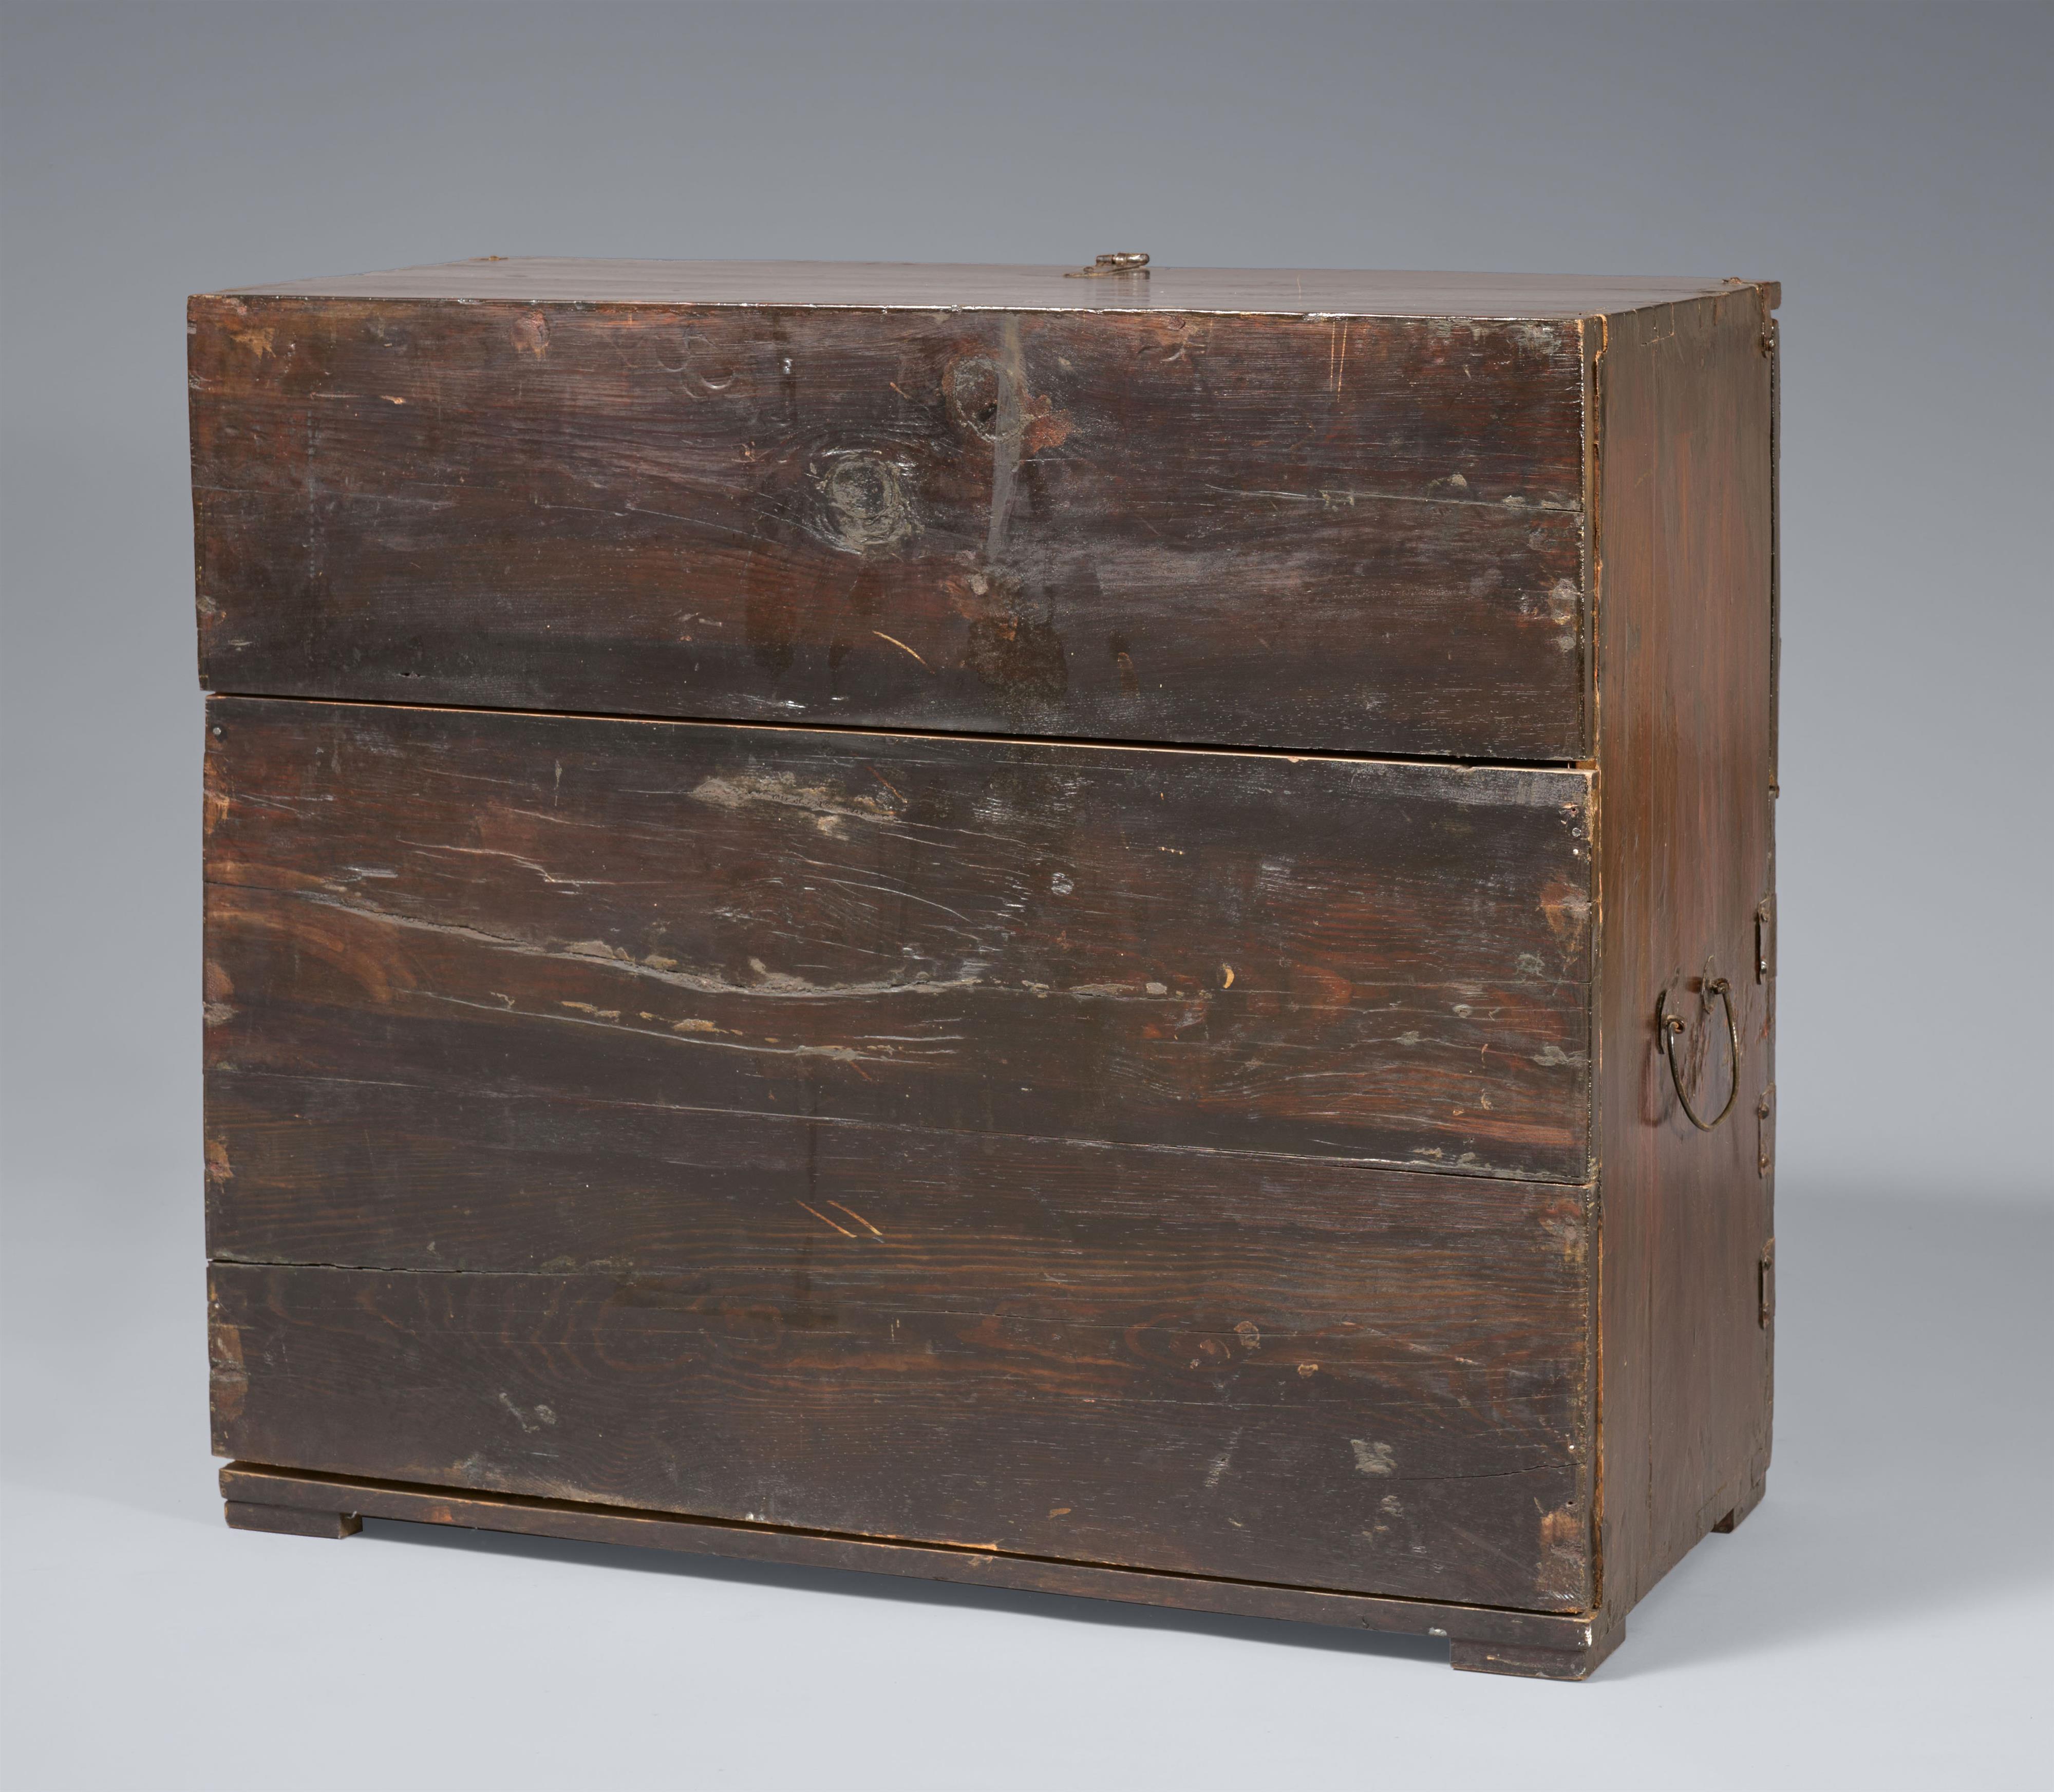 A lacquered pine wood clothing chest (bandaiji). Present-day North Korea, Pakchon area. Mid-19th century - image-2